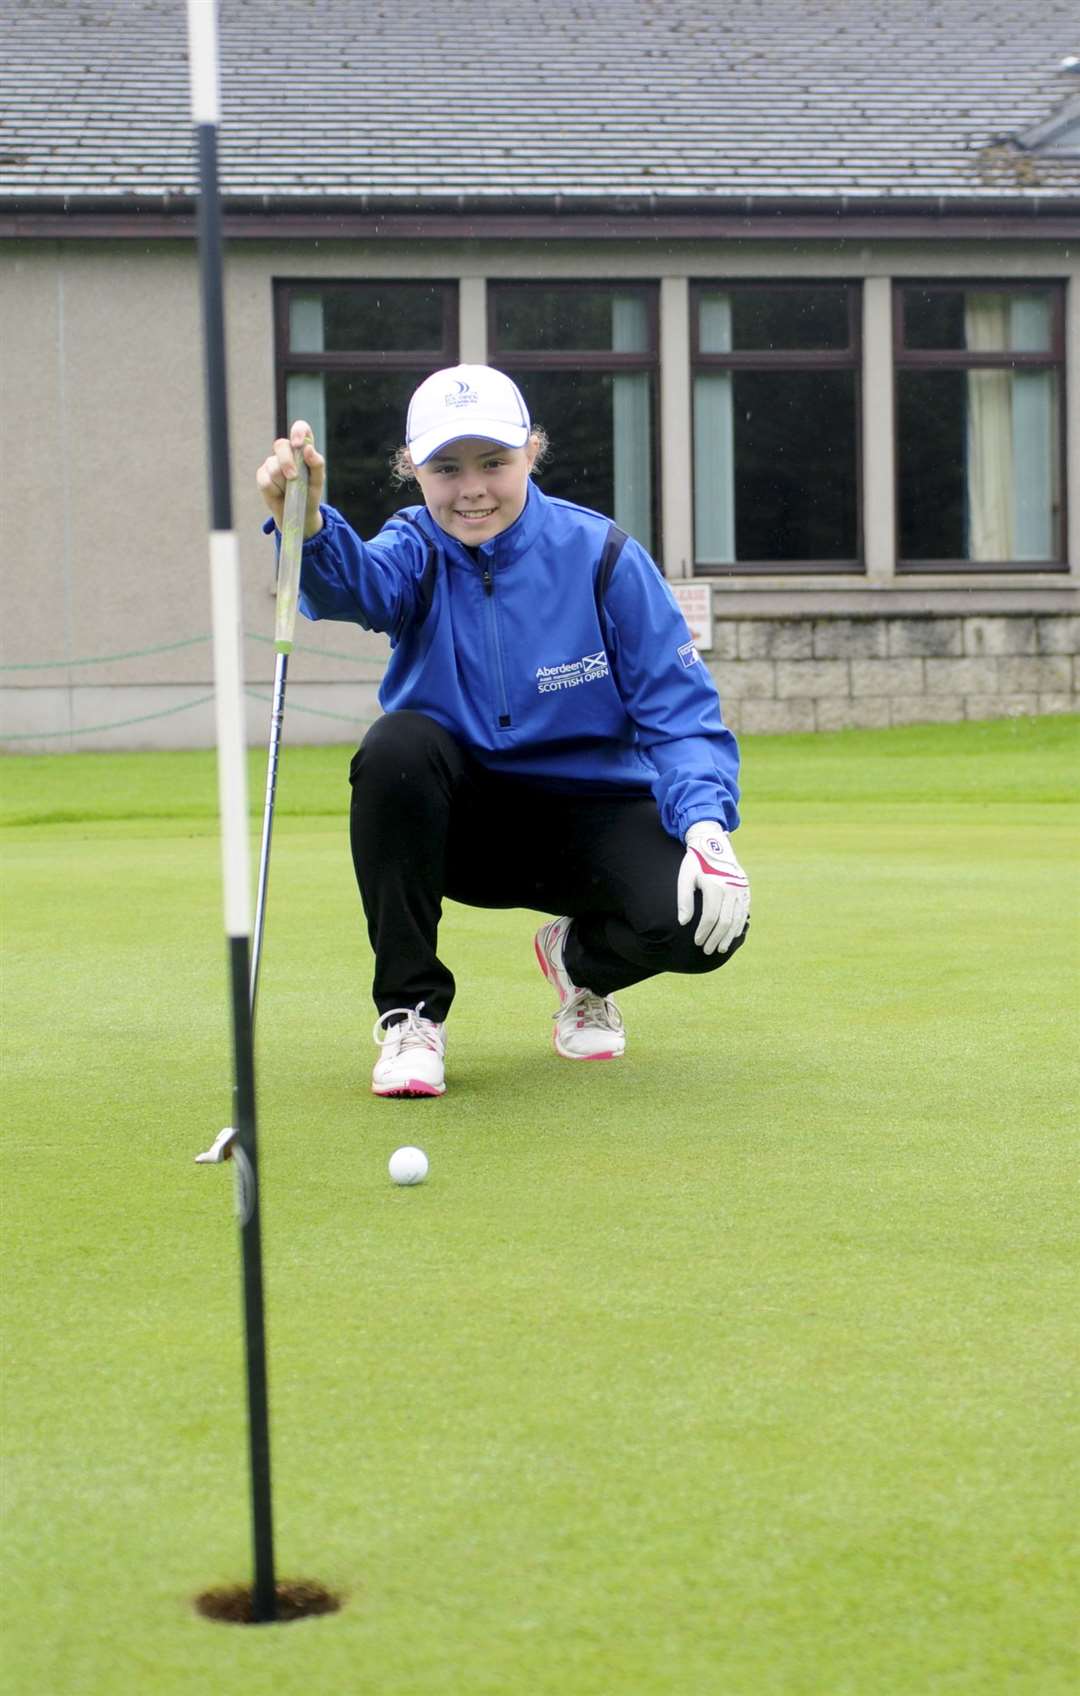 Lucy Buckley leads the ladies championship. Photo: Becky Saunderson.